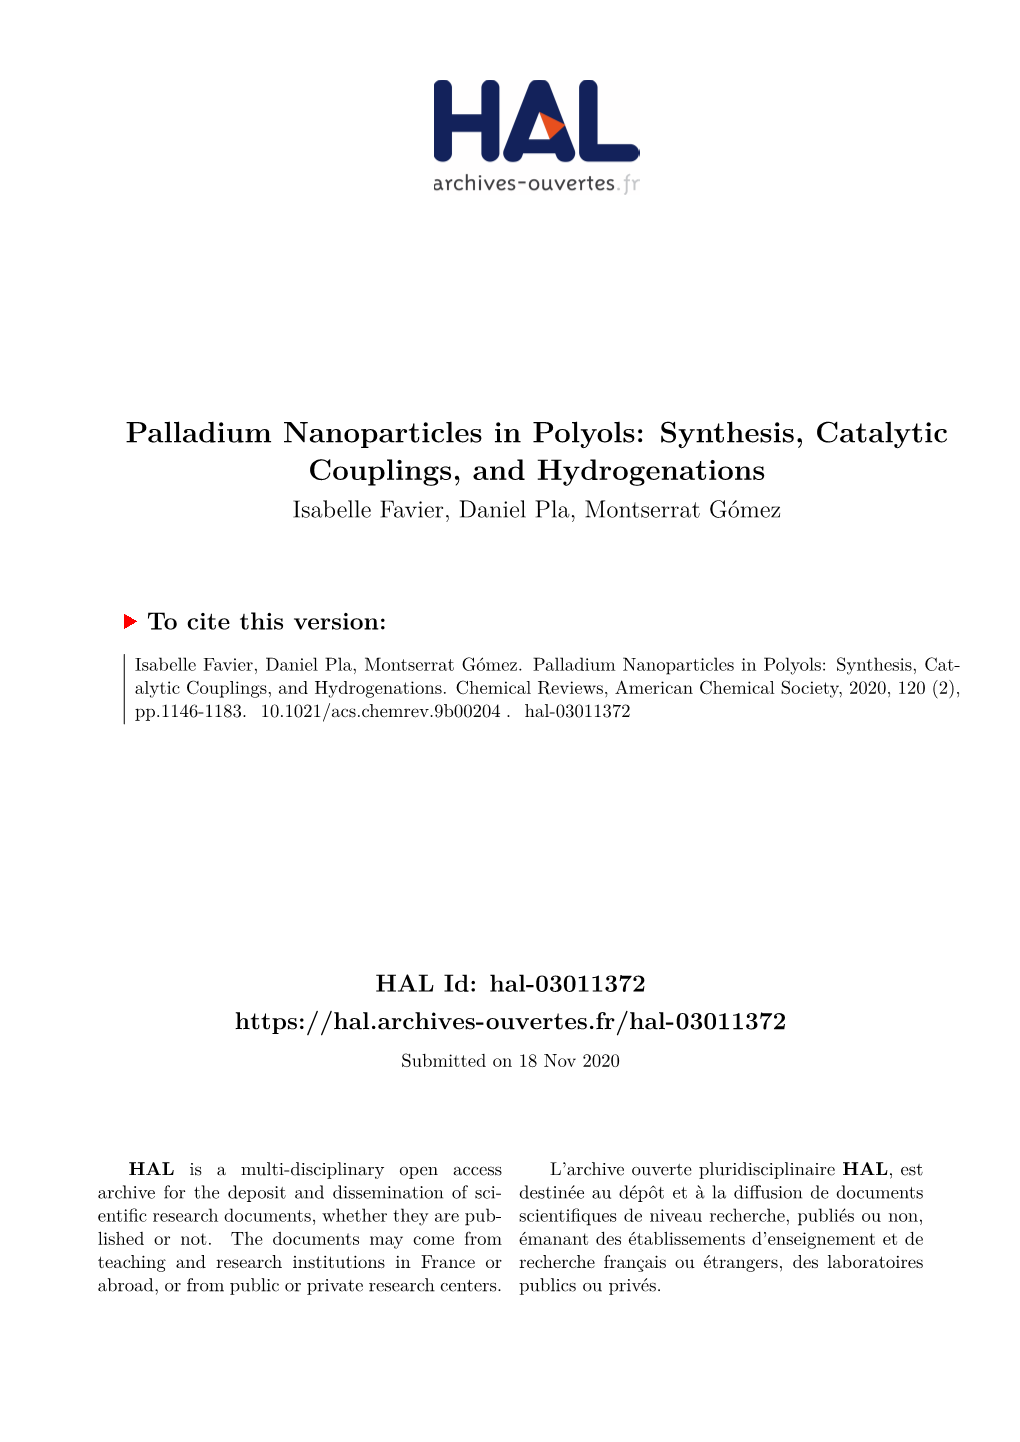 Palladium Nanoparticles in Polyols: Synthesis, Catalytic Couplings, and Hydrogenations Isabelle Favier, Daniel Pla, Montserrat Gómez